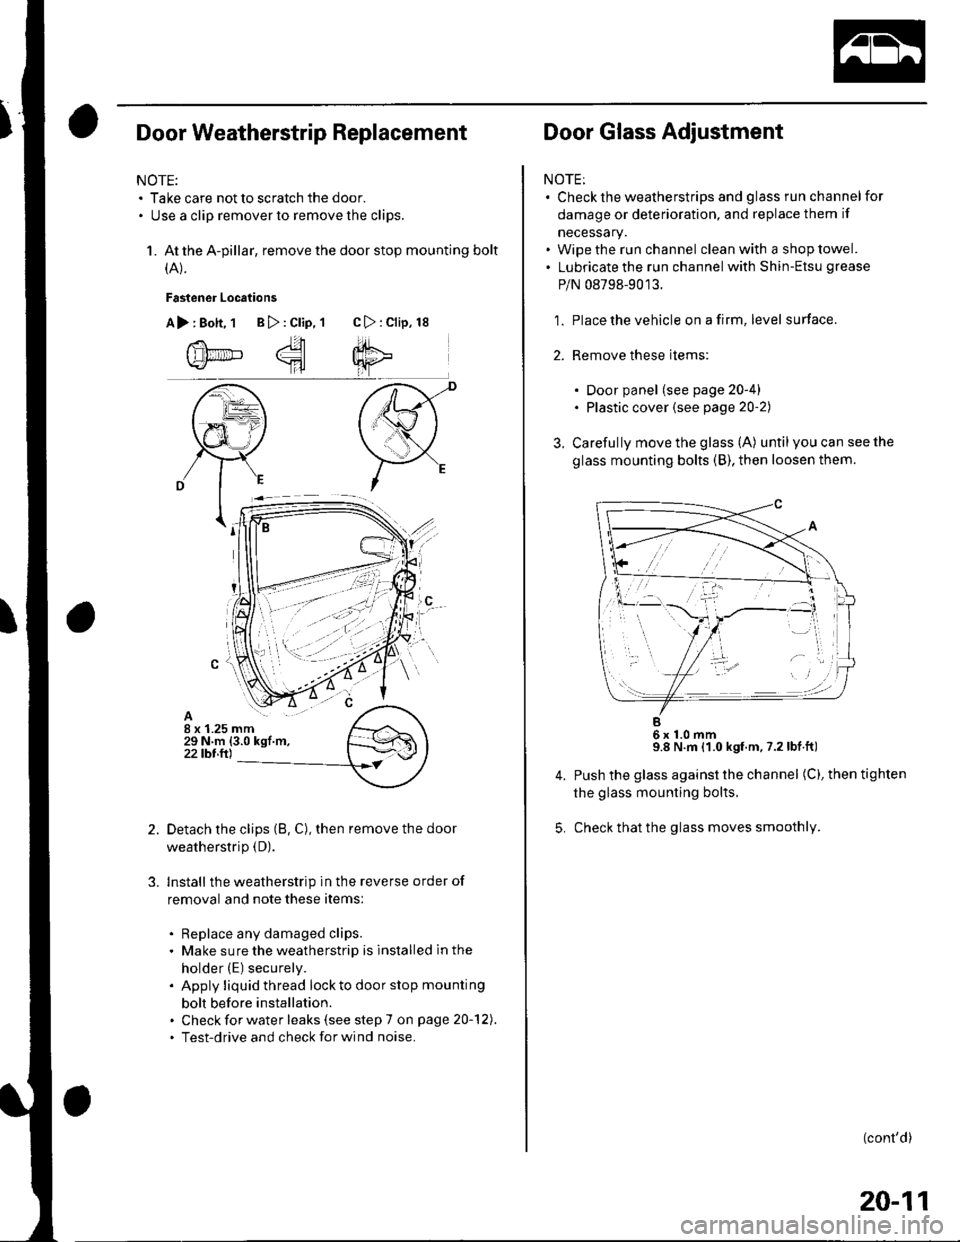 HONDA CIVIC 2003 7.G User Guide Door Weatherstrip Replacement
NOTE:. Take care not to scratch the door.. Use a clip remover to remove the clips.
1. At the A-pillar, remove the door stop mounting bolt
(A).
Fastener Locations
A>:Bott,